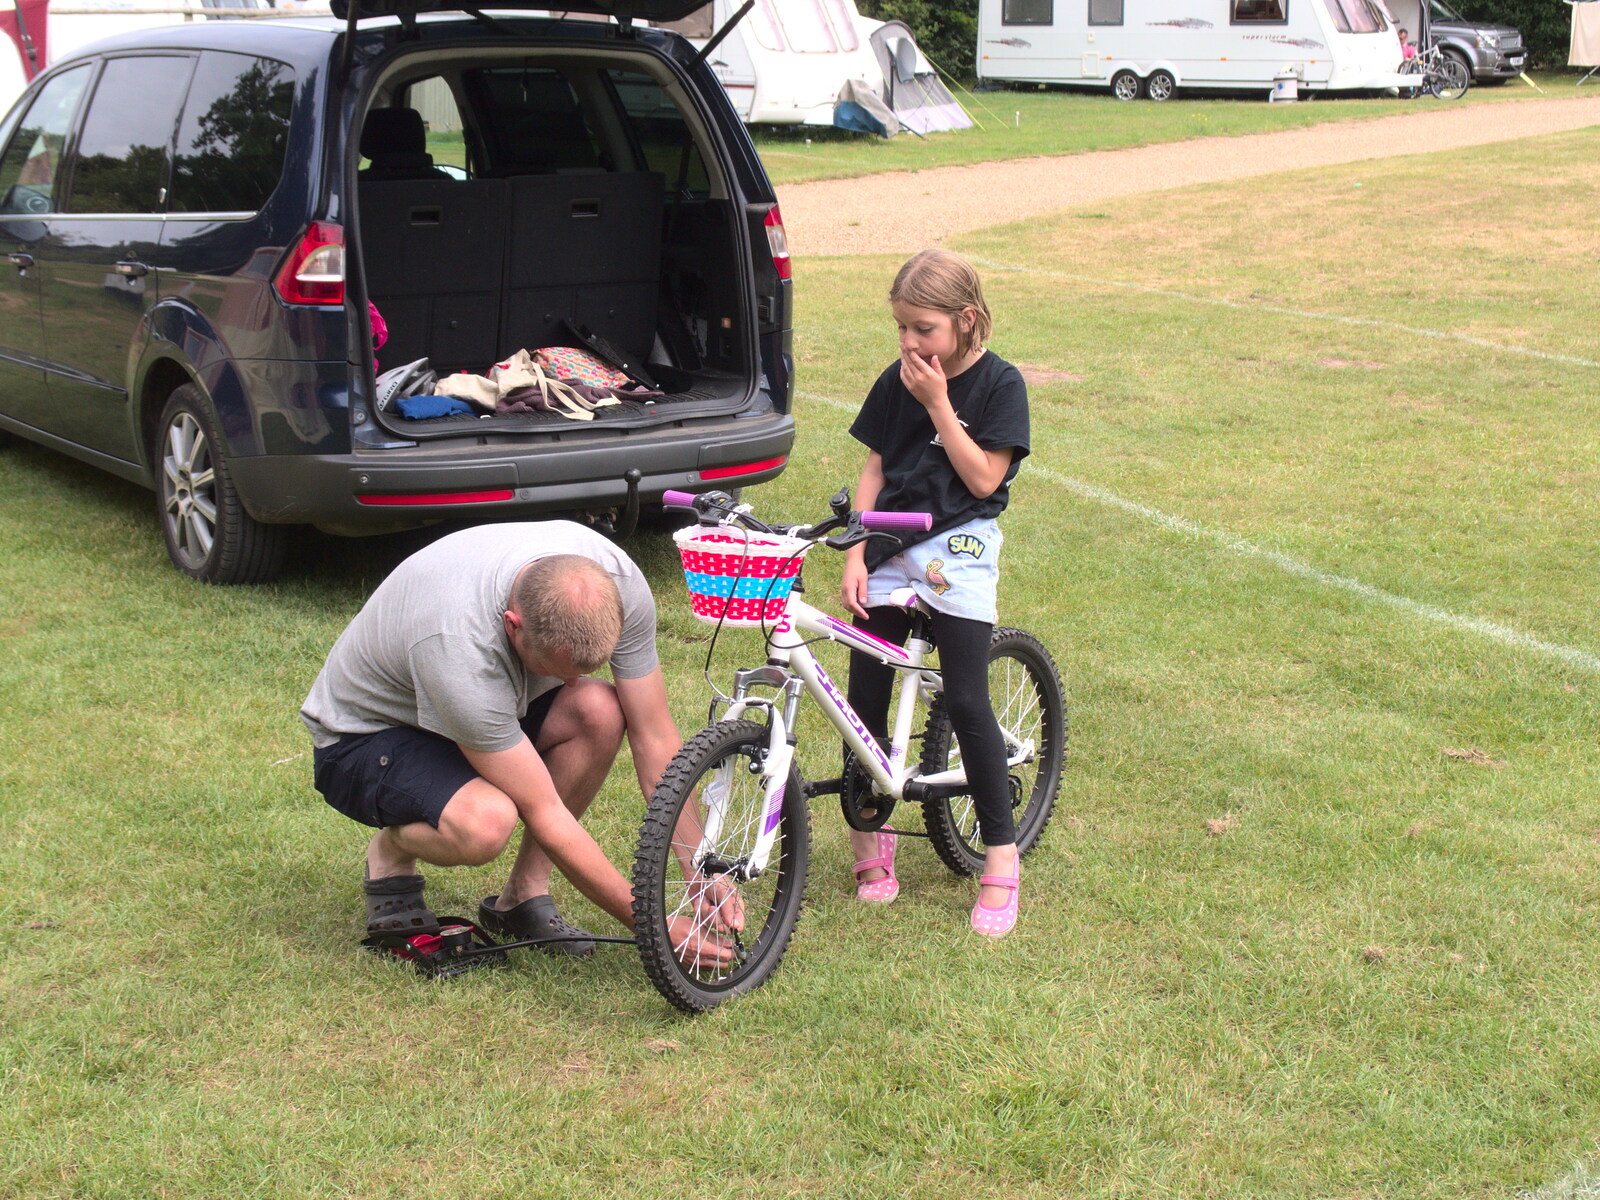 Some emergency bicycle mechanics occurs from Camping at Dower House, West Harling, Norfolk - 1st July 2017